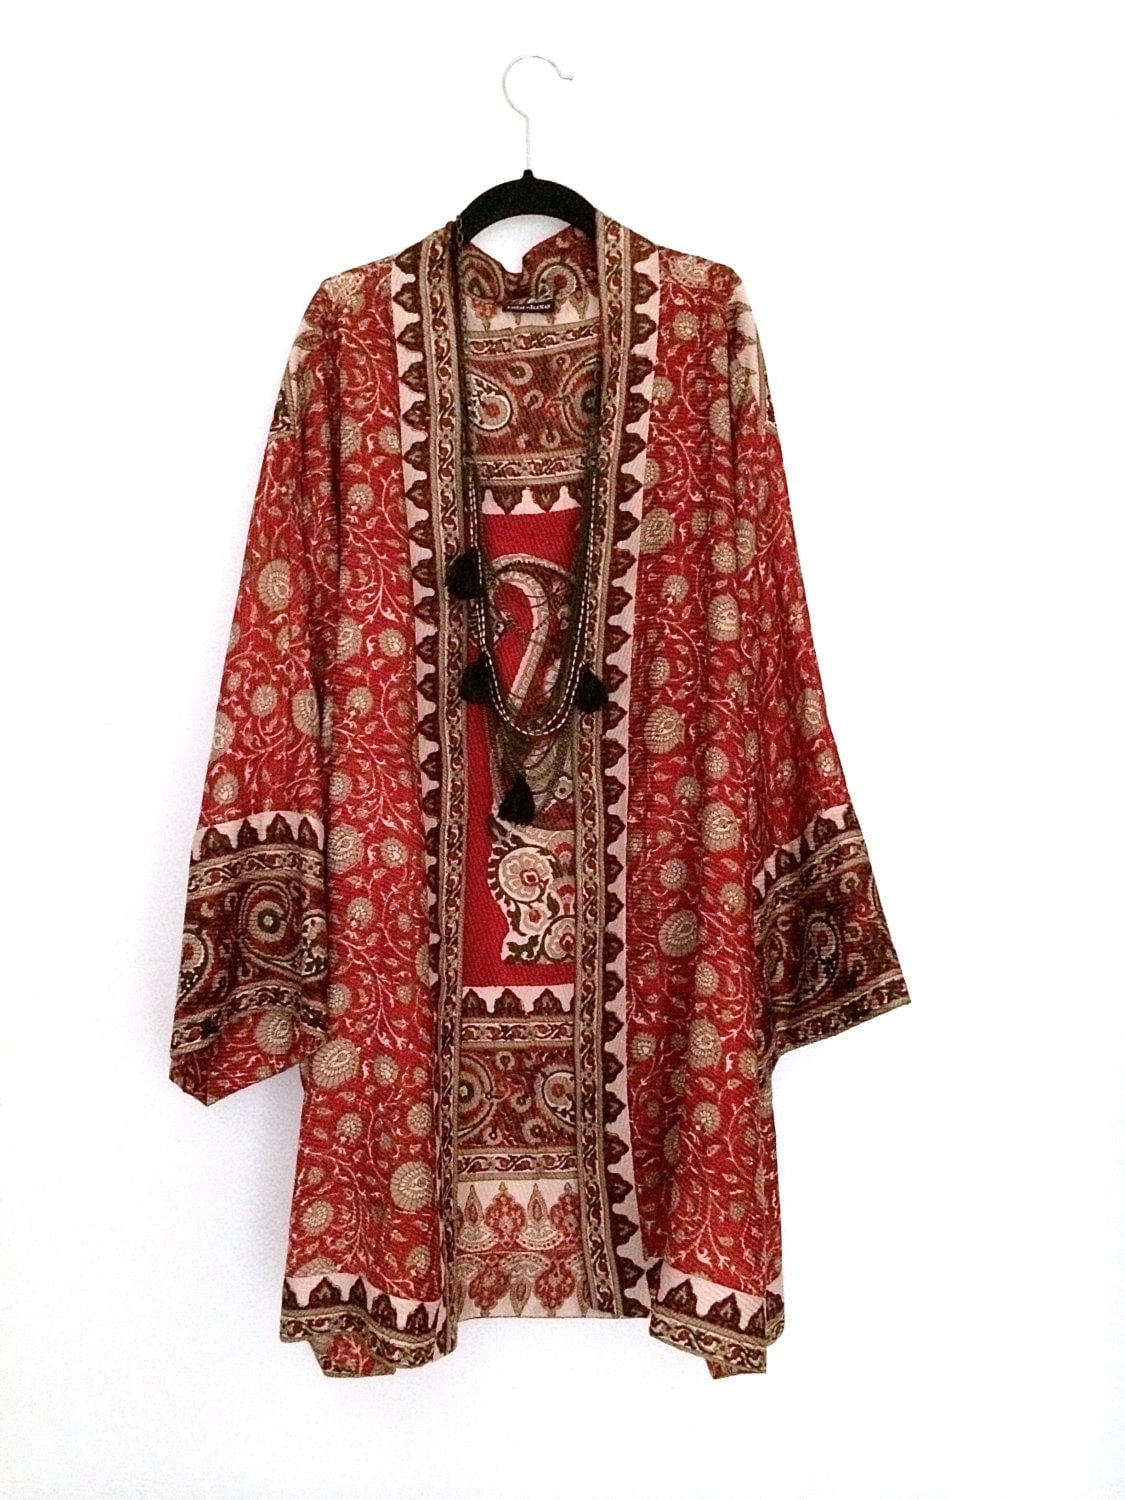 Silk Kimono jacket oversized / cocoon cover up red floral